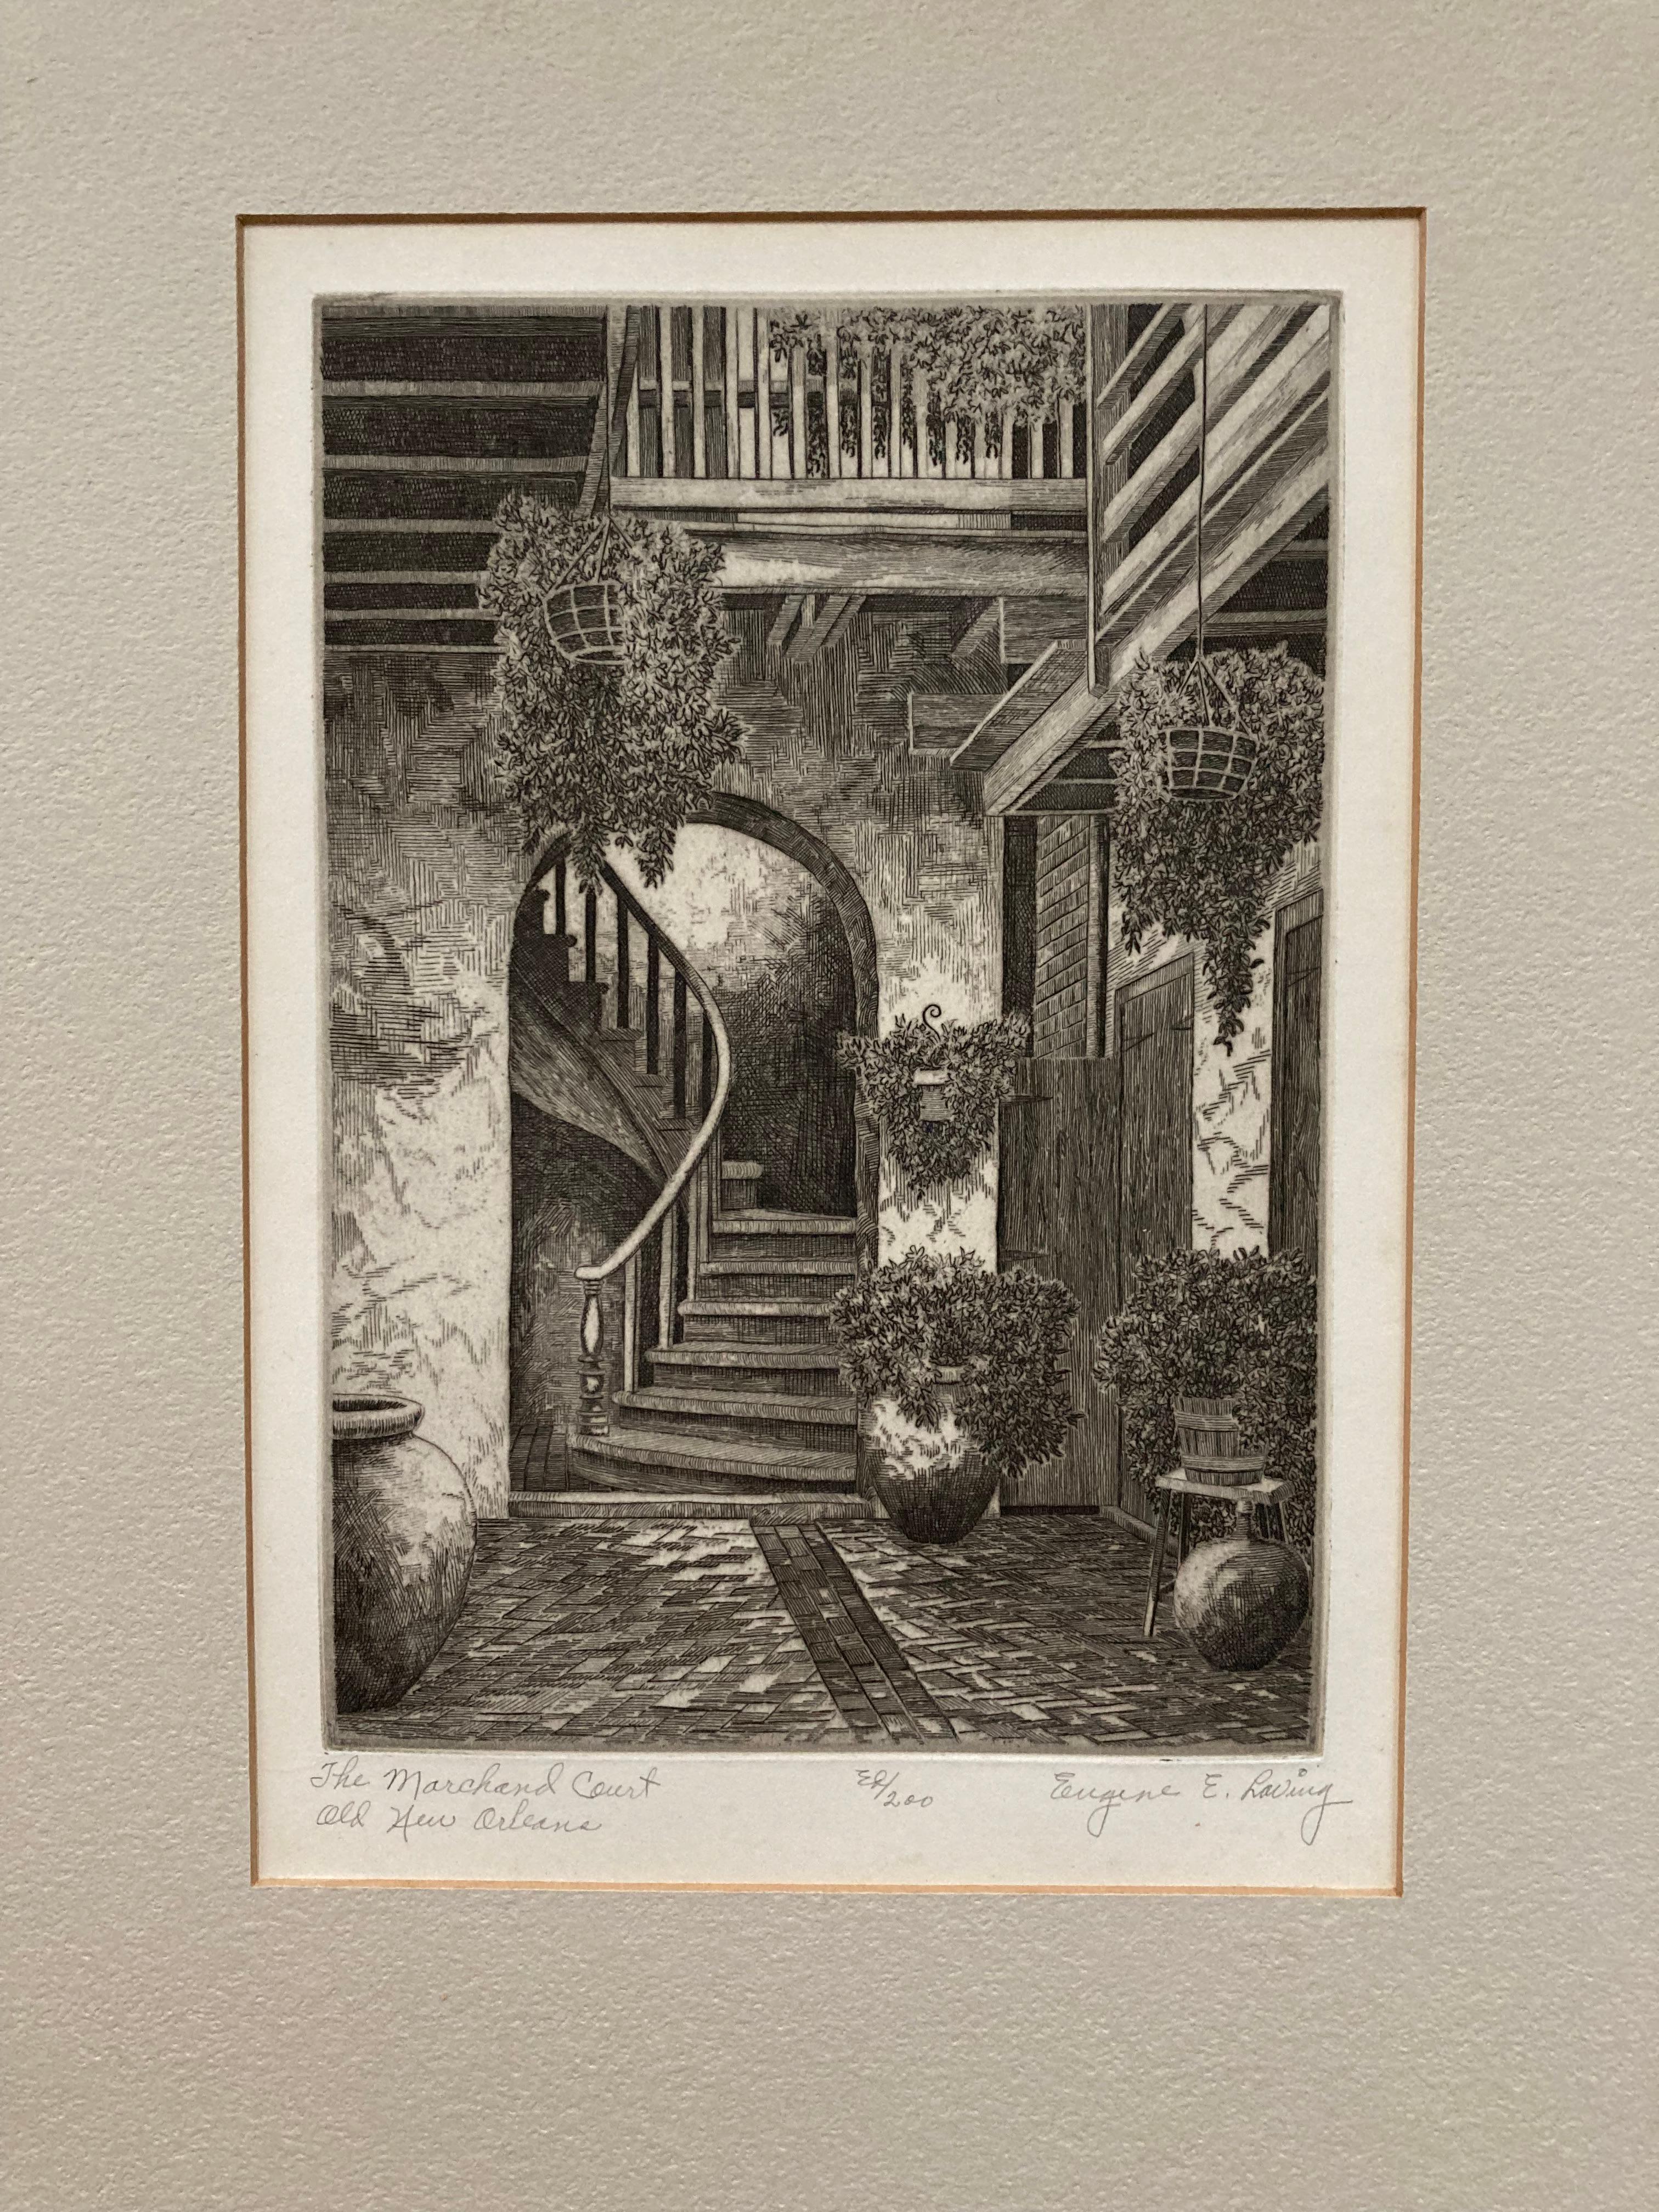 Marchand Courtyard, French Quarter, Old New Orleans (Signed) - Print by Eugene Loving